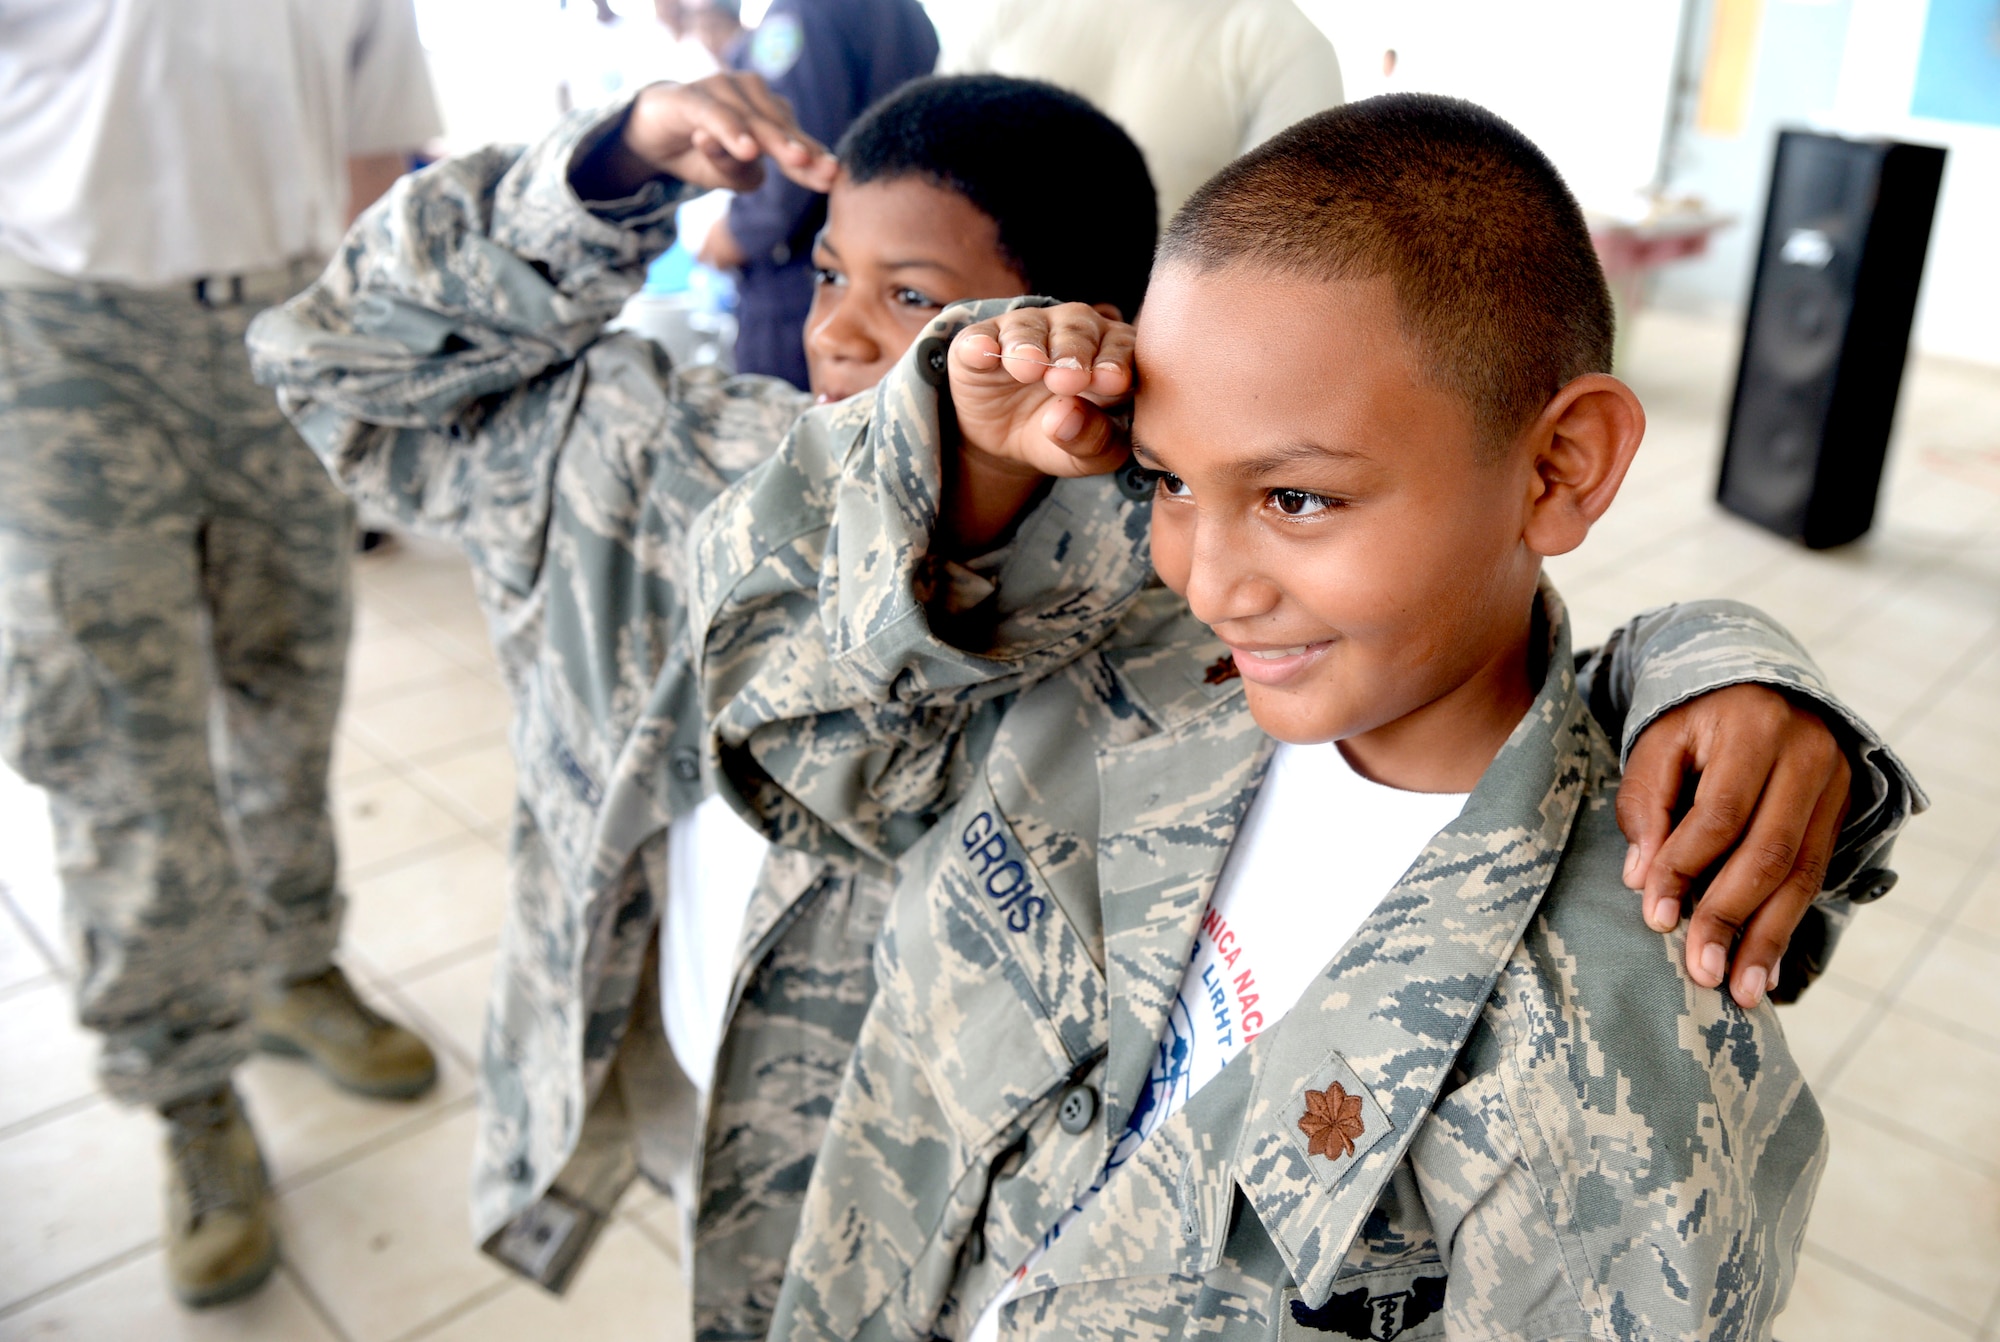 Children attending the Guardian of the Fatherland event at Puerto Castillo Naval Base in Trujillo, Honduras, June 6, 2015, try on the U.S. Air Force uniforms. More than 20 NEW HORIZONS Honduras 2015 personnel volunteered to participate in the event. NEW HORIZONS was launched in the 1980s and is an annual joint humanitarian assistance exercise that U.S. Southern Command conducts with a partner nation in Central America, South America or the Caribbean. The exercise improves joint training readiness of U.S. and partner nation civil engineers, medical professionals and support personnel through humanitarian assistance activities. (U.S. Air Force photo by Capt. David J. Murphy/Released)